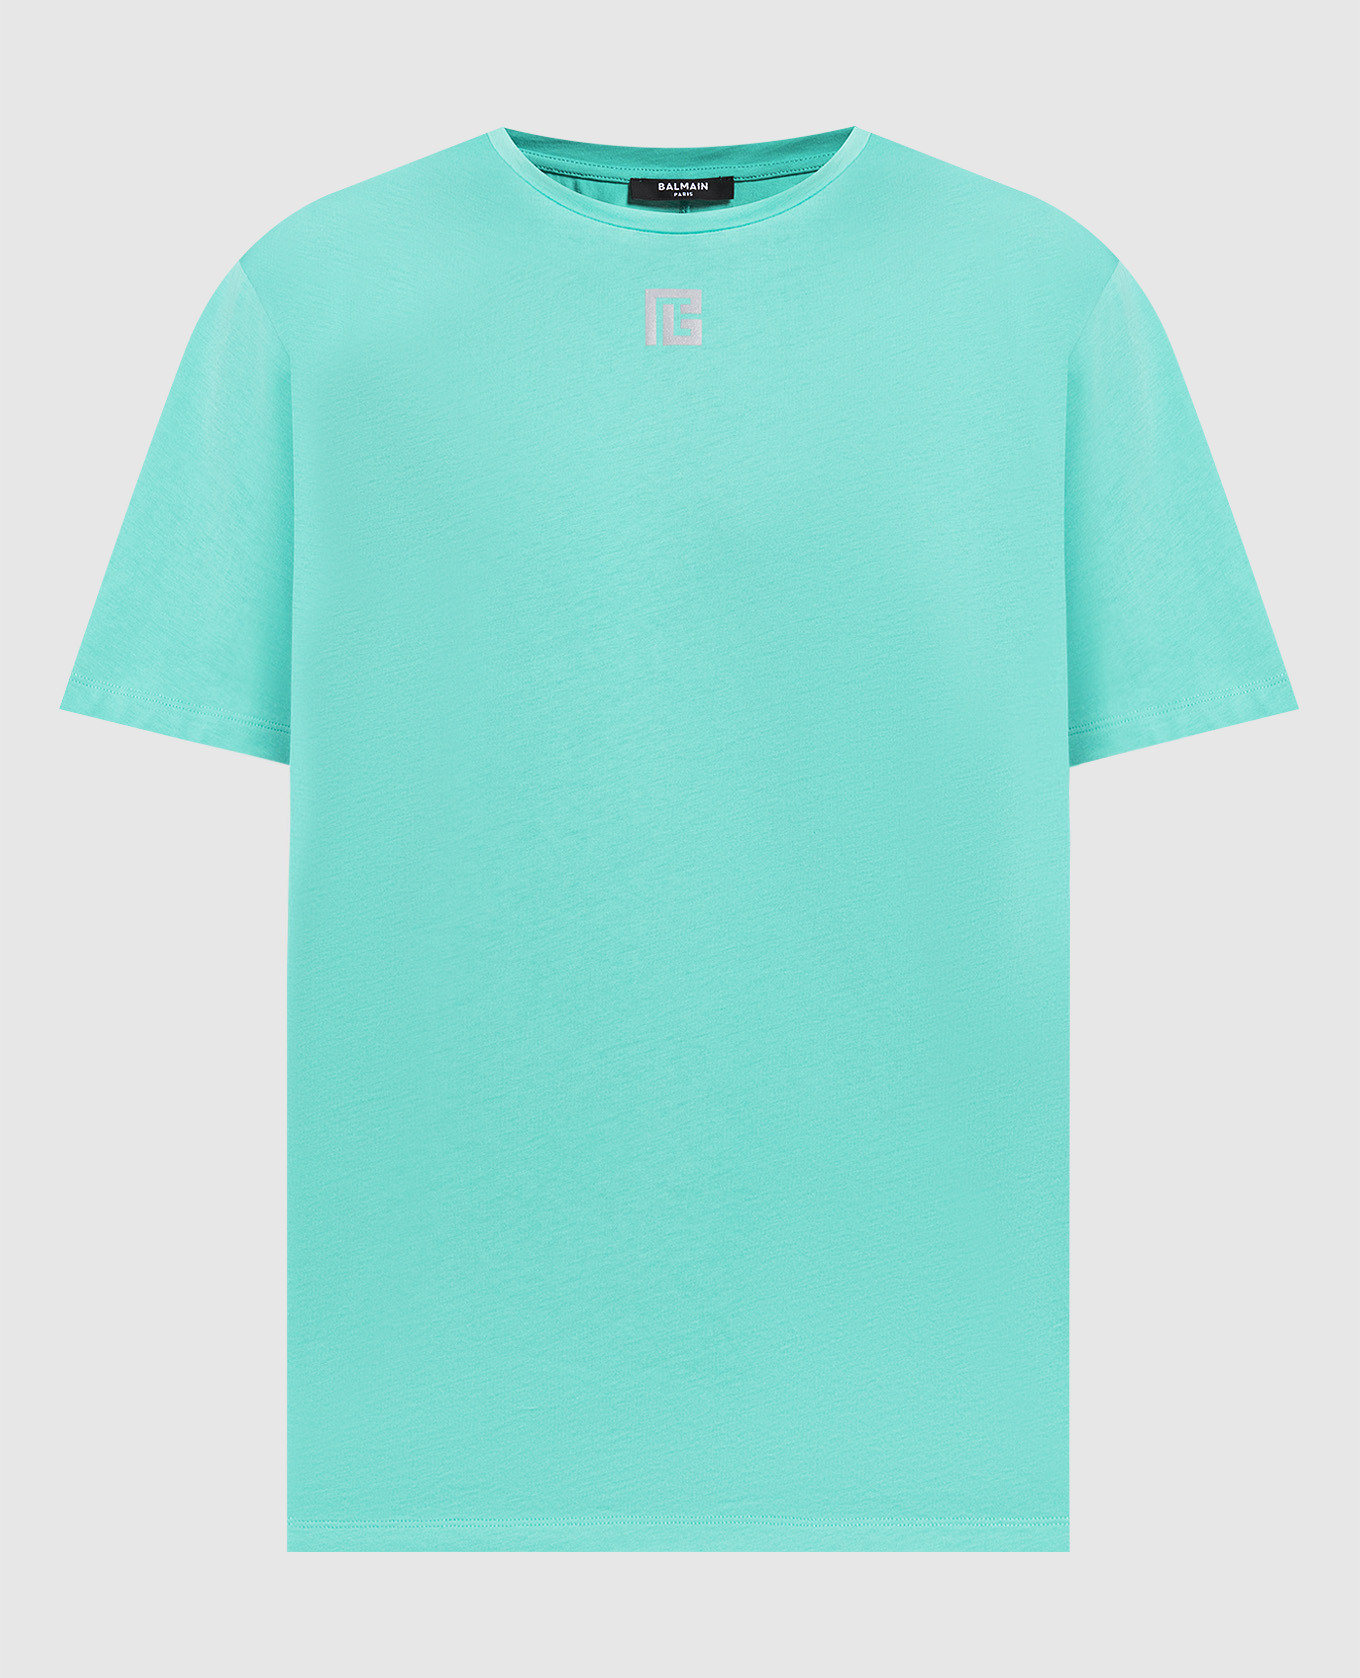 Green t-shirt with reflective logo